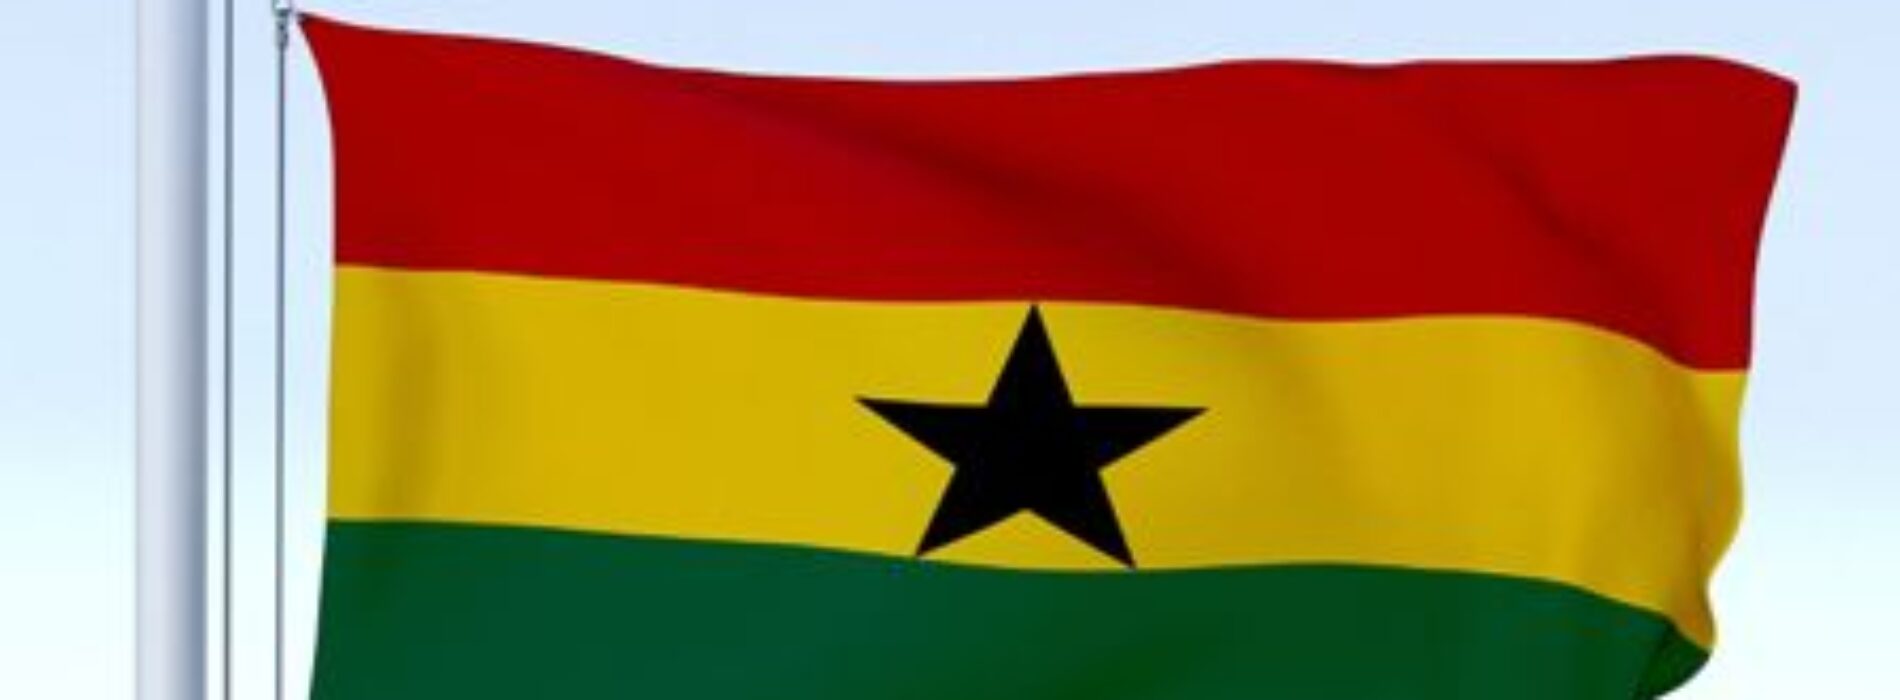 Ghana becomes 1st to get COVAX COVID-19 vaccines in Africa